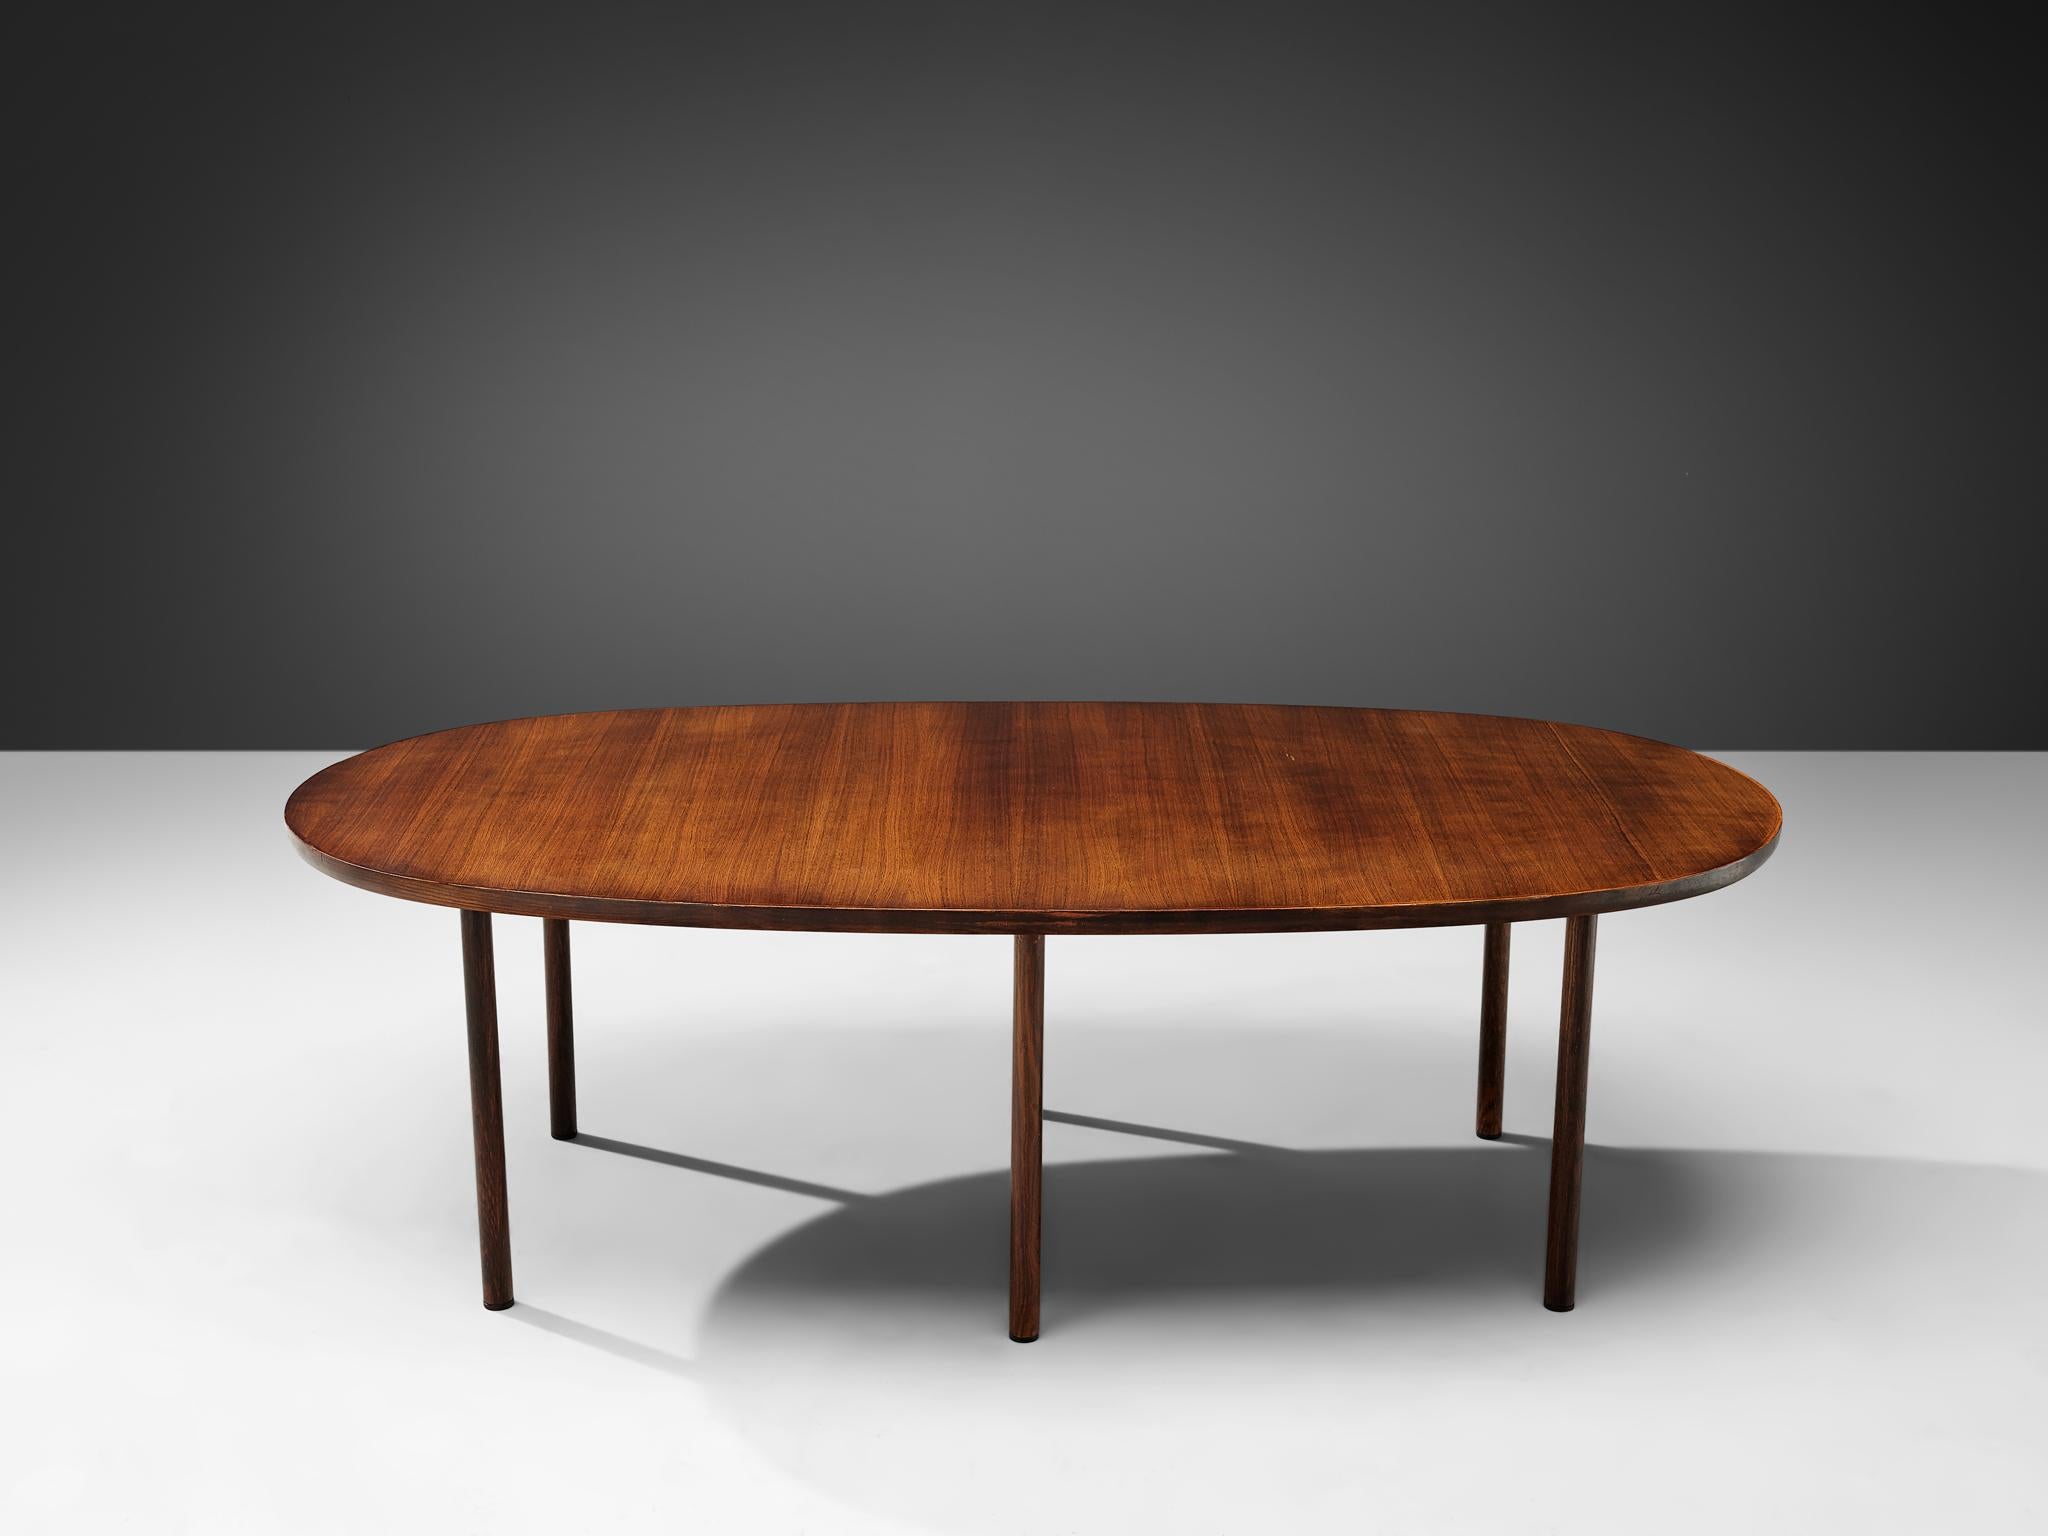 Dining table, rosewood, Denmark, 1960s

A lovely oval dining table rosewood. The grain of the top of this table is striking, showing variety of dark and lighter tones, for which rosewood is well-known. The design of the table is Classic and simple.